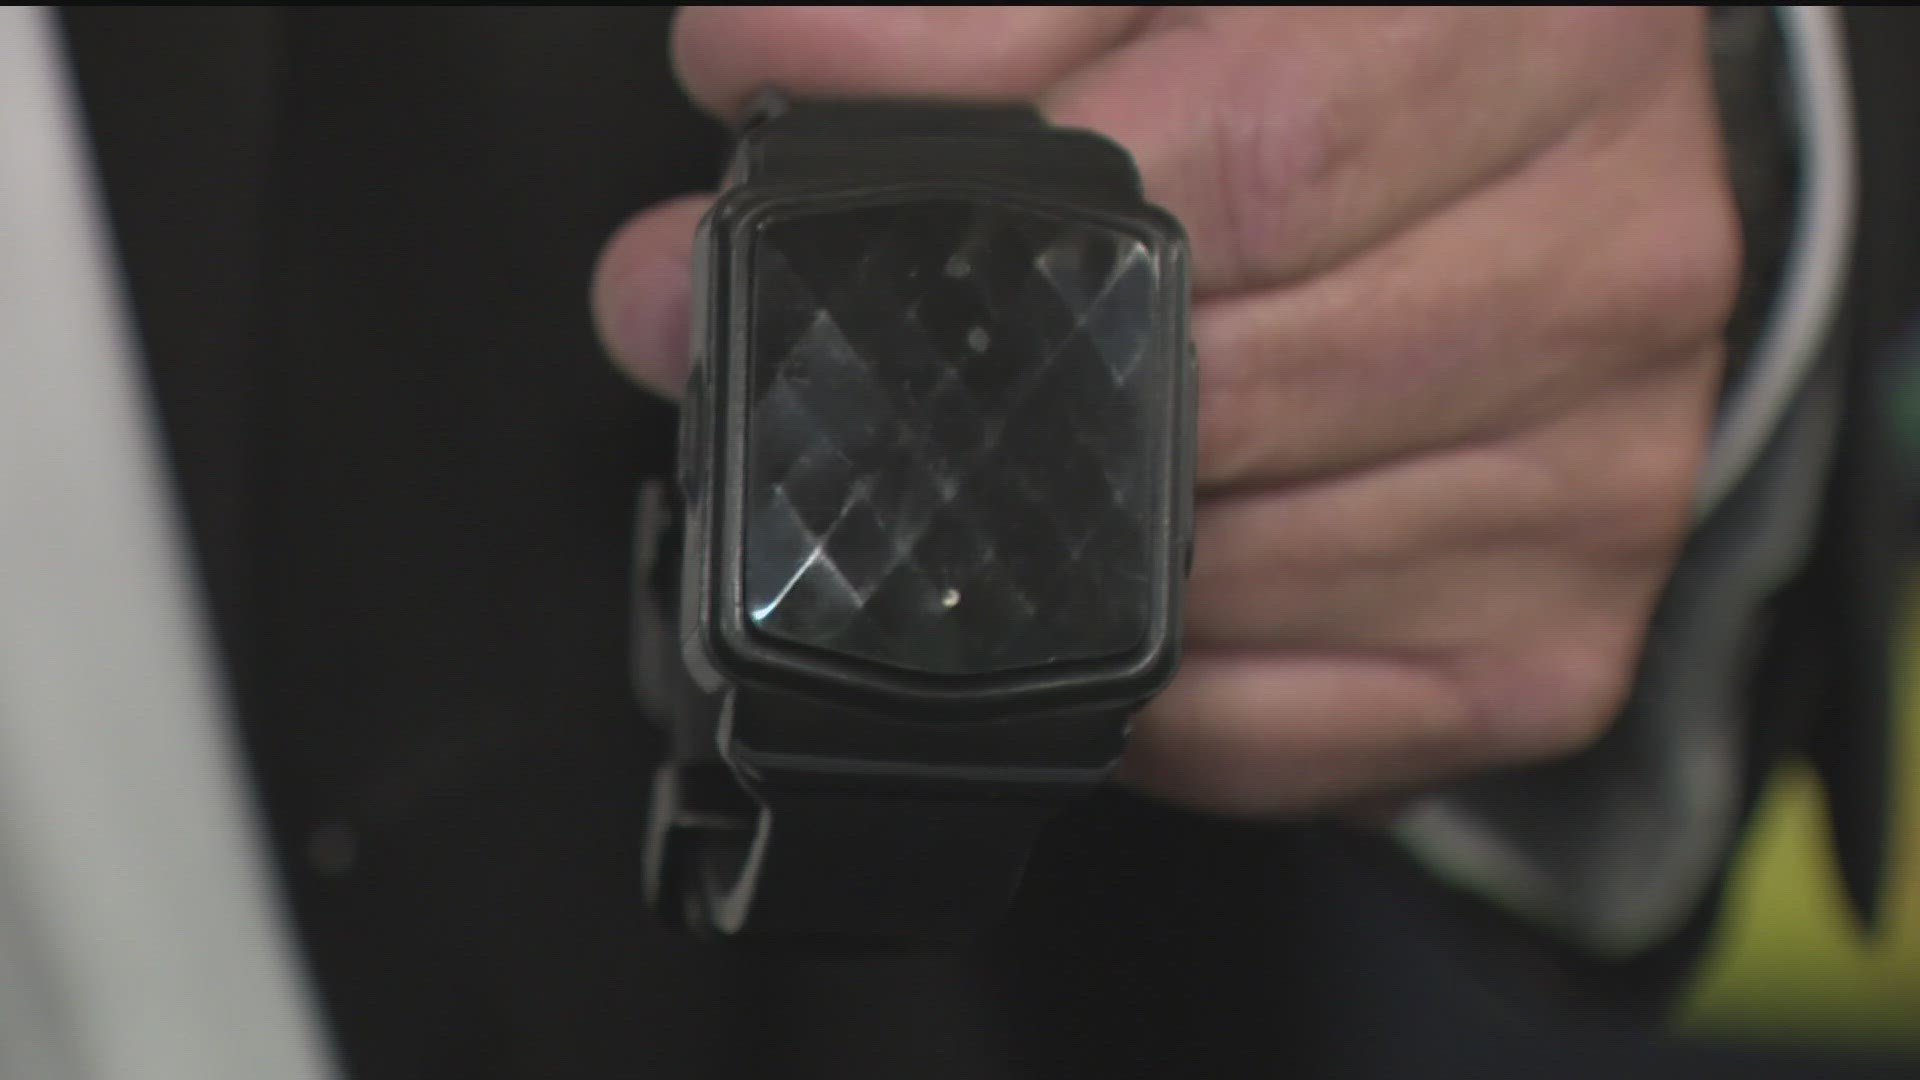 The Fulton County Board of Commissioners decided to pull more than $2 million in funding for inmate wrist monitors at the county jail.